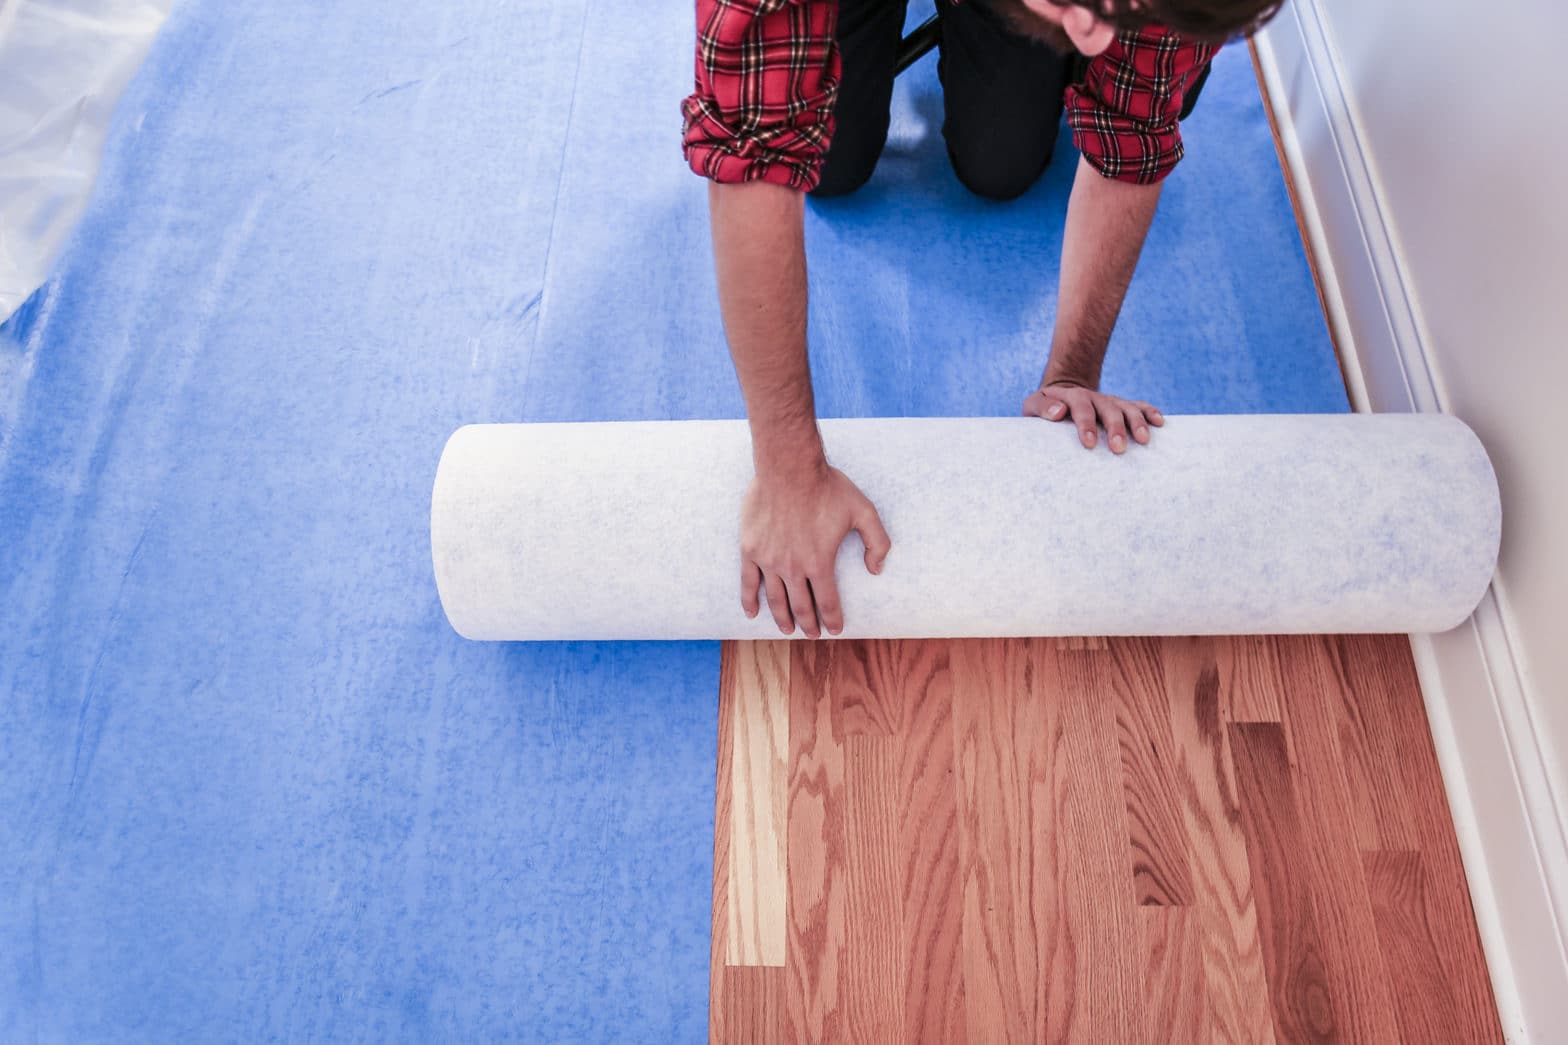 How To Choose The Best Floor Protector - For Contractors & Movers